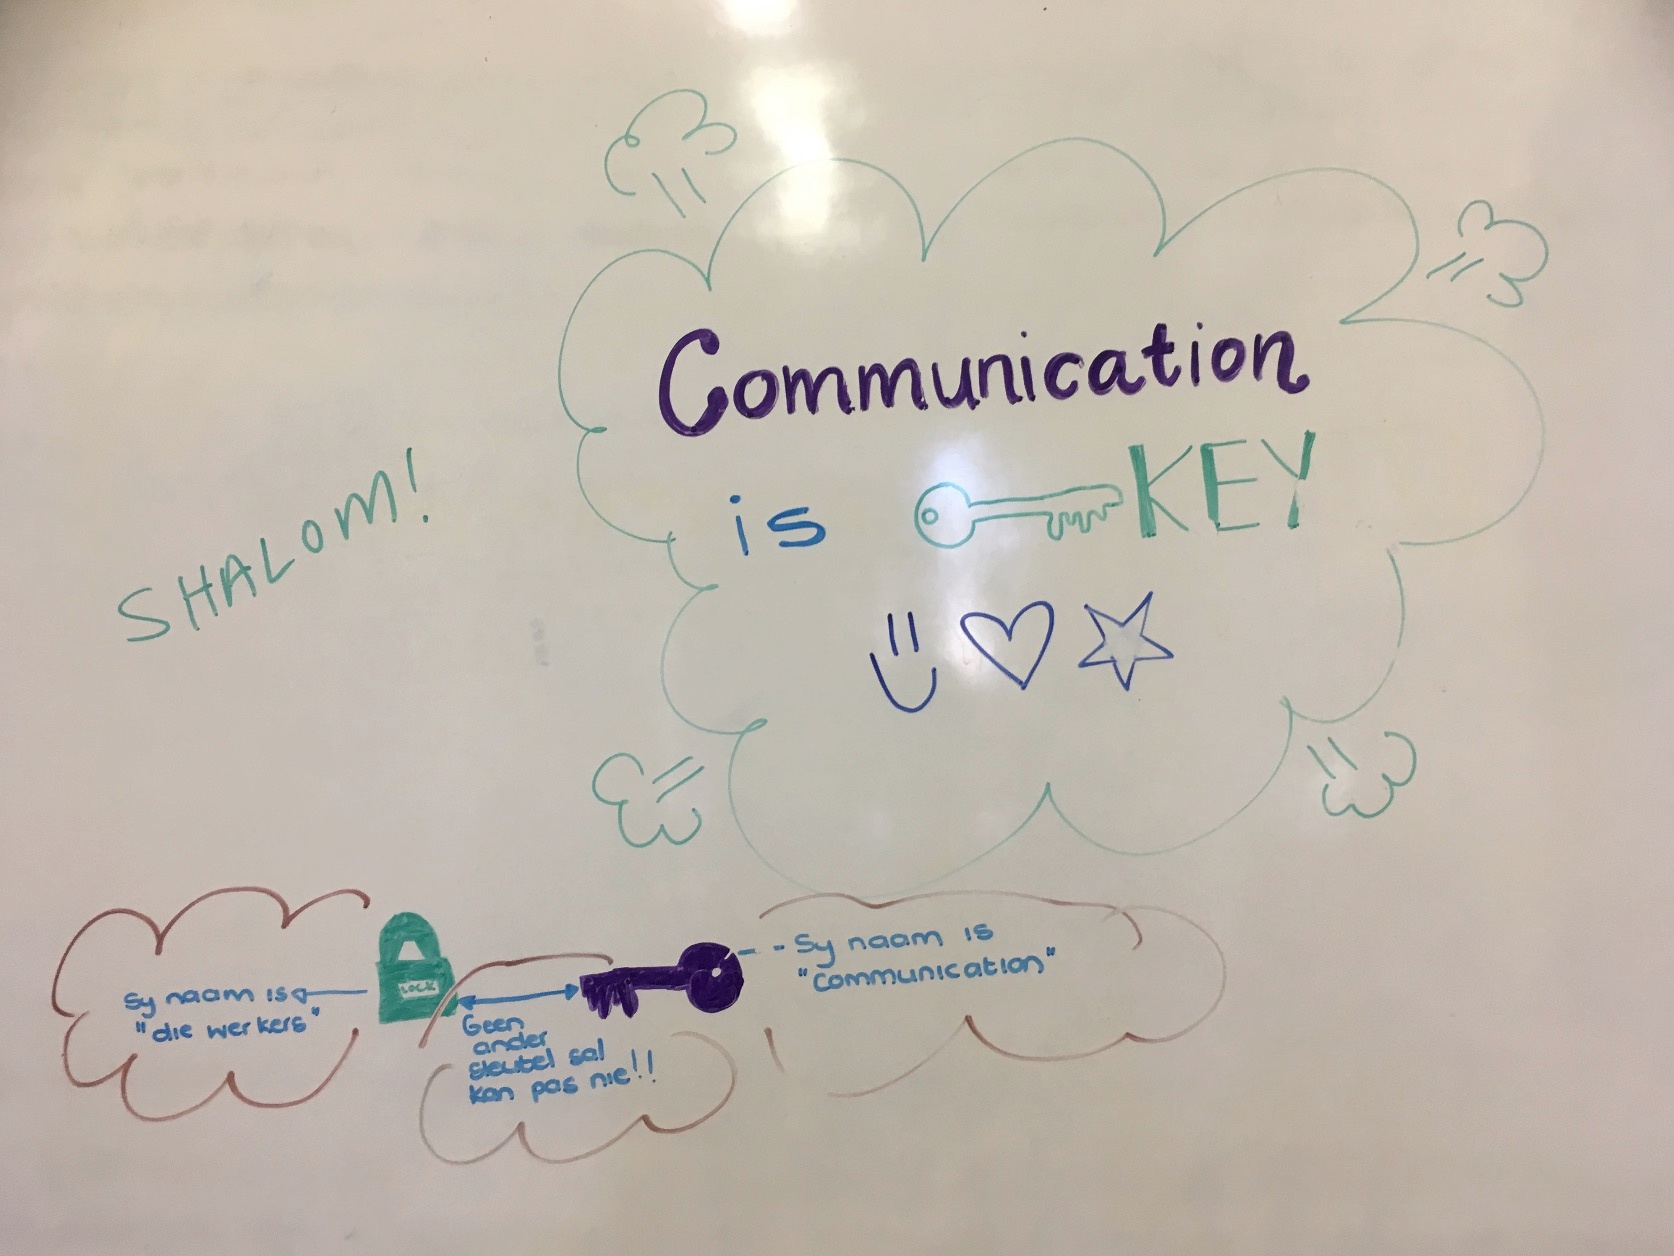 Process photograph from Kathryn Smith’s 2018 artist residency on A4’s top floor that depicts a whiteboard with text and drawings in felt pen marker. On the right, a speech bubble with the phrase ‘Communication is KEY’ is accompanied by a drawing of a key. On the left, the word ‘Shalom!’.
